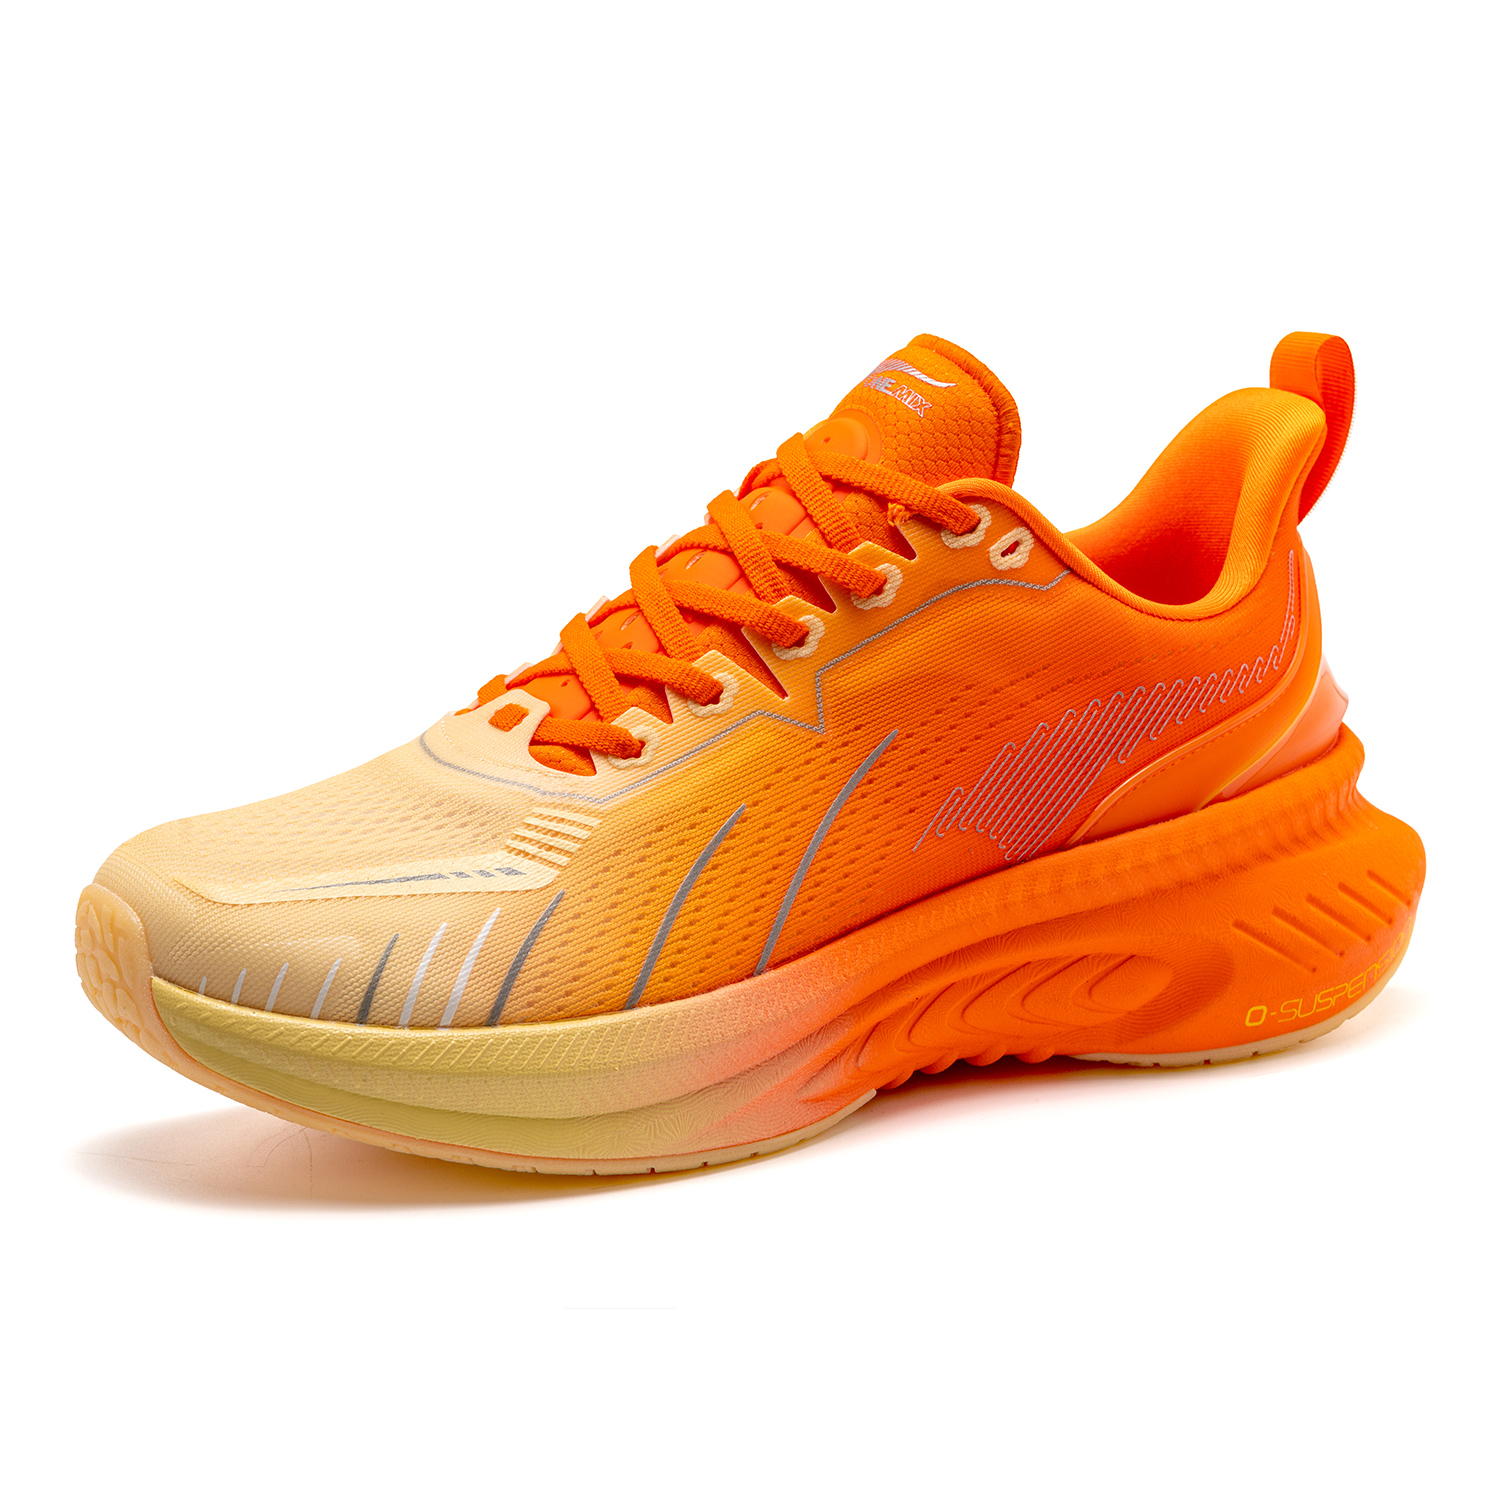 Orange Running Shoes Sport ONEMIX Breathable Sneakers for Men